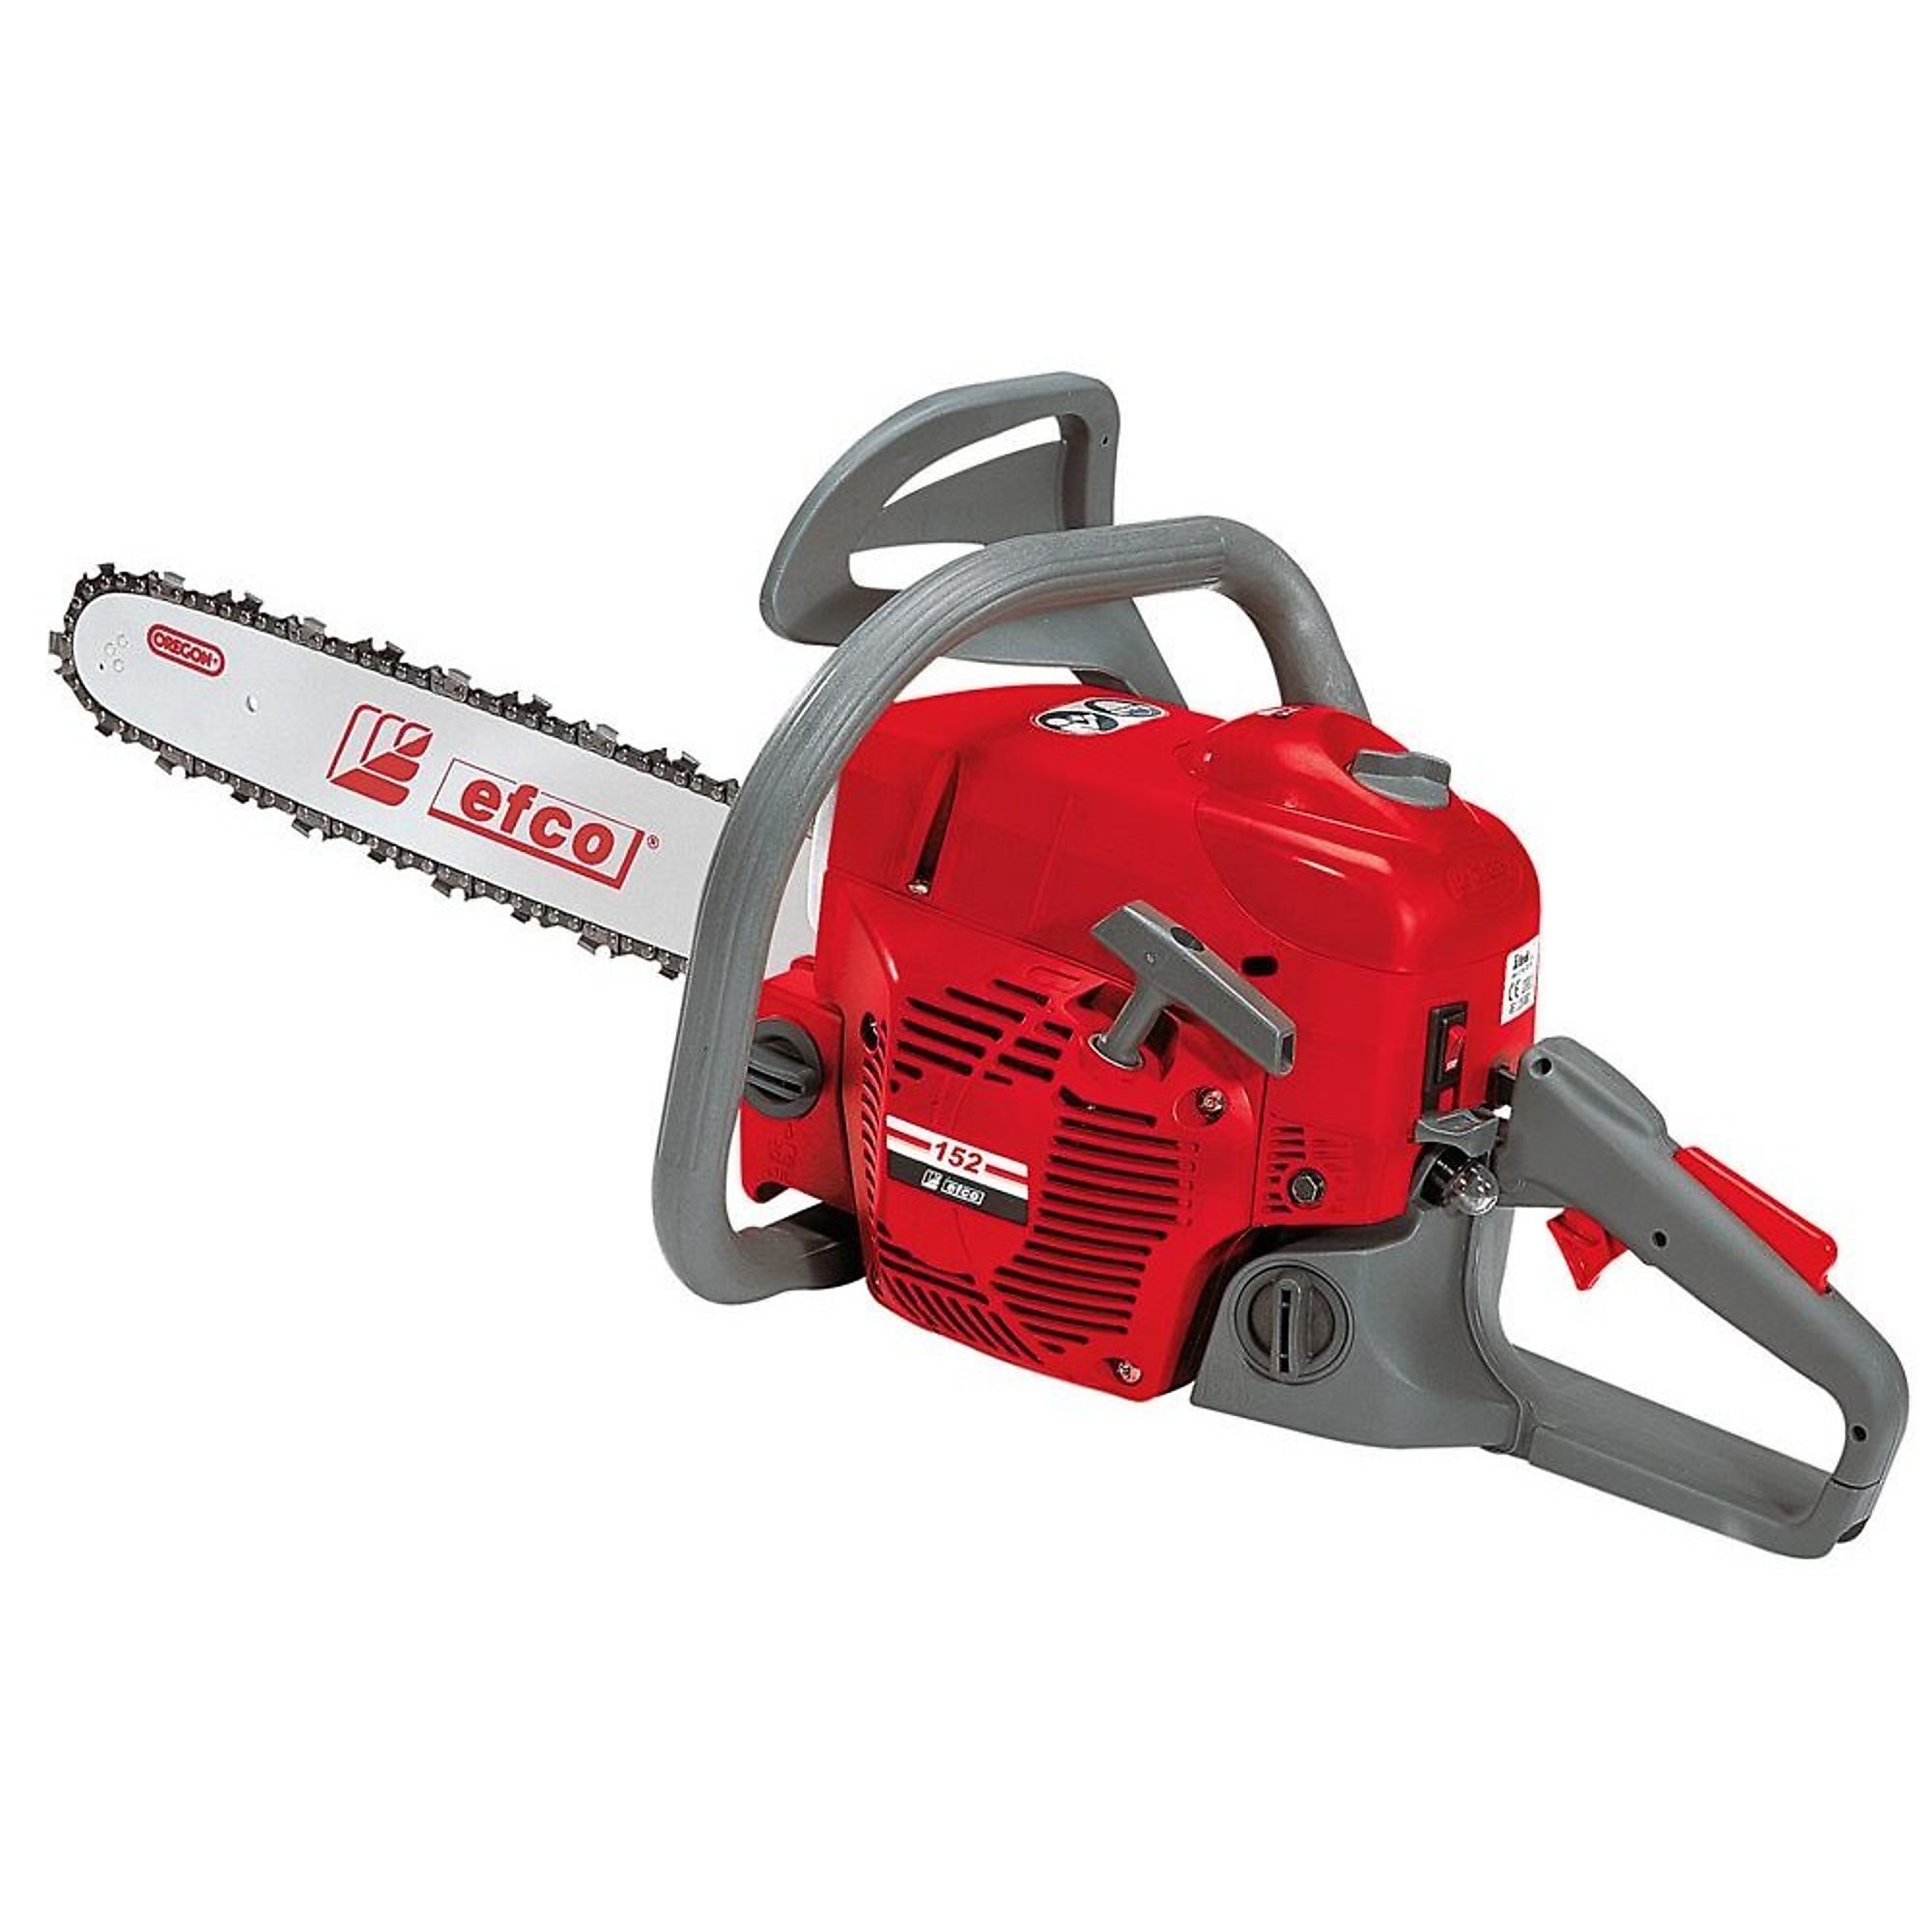 Efco, MT-Series Gas Chainsaw, Bar Length 18 in, Engine Displacement 51.7 cc, Model MT5200-18